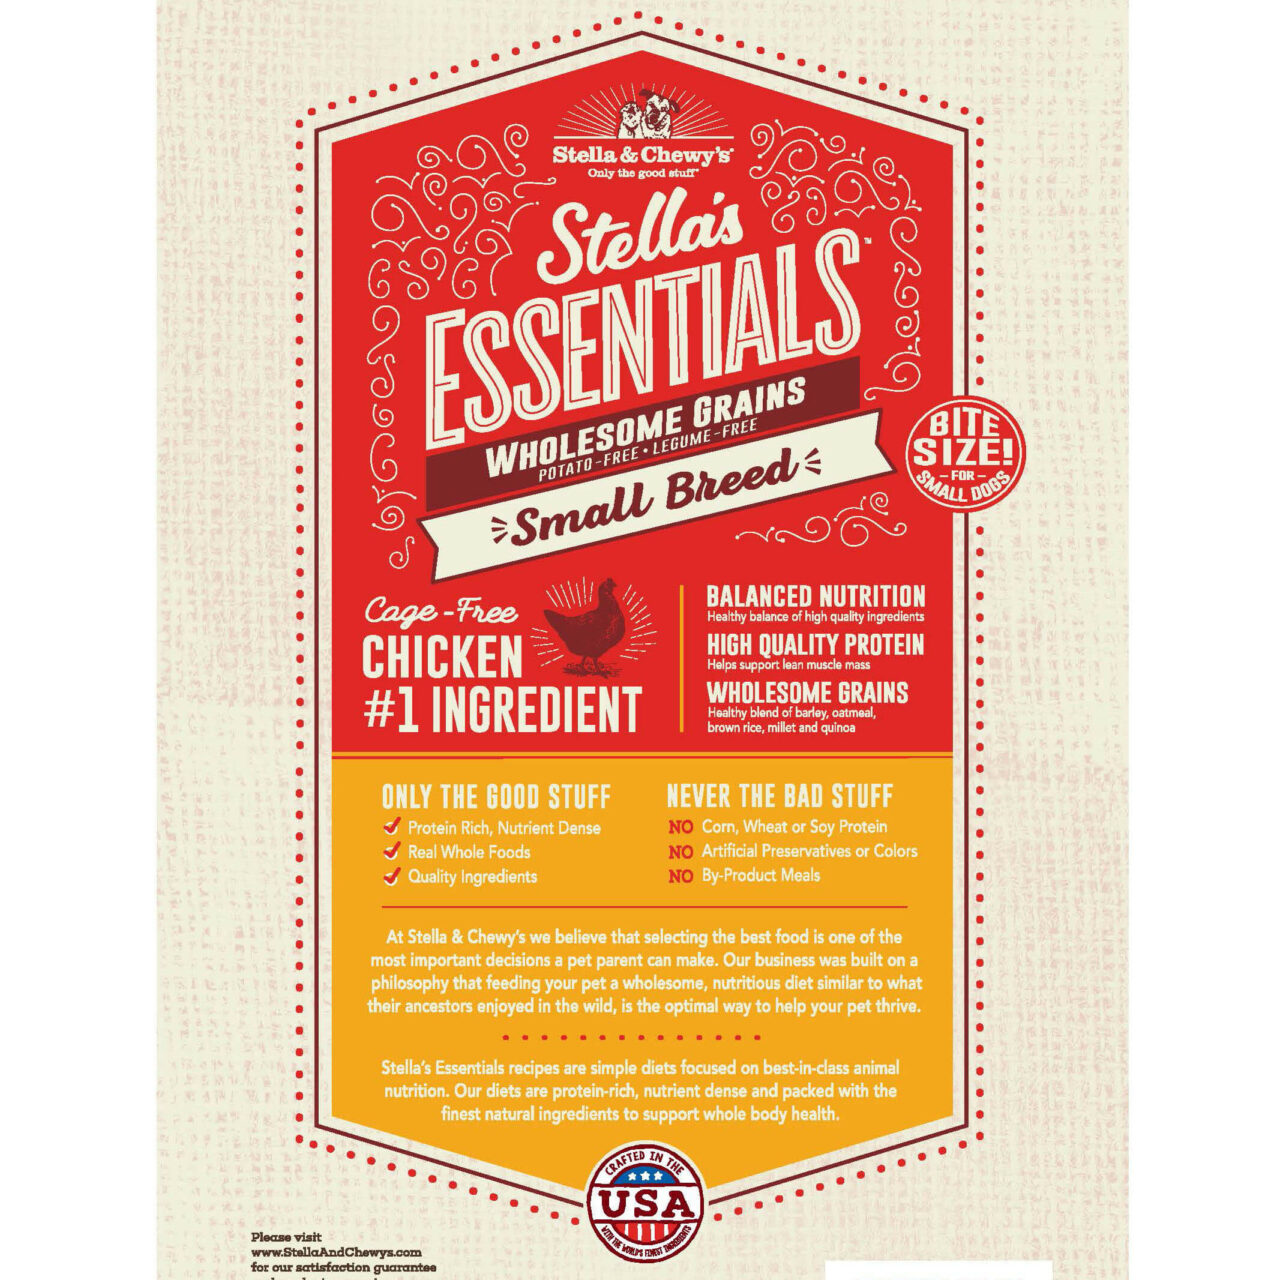 Stella & Chewy's Essentials Small Breed Cage-Free Chicken & Ancient Grains Recipe Dog Kibble